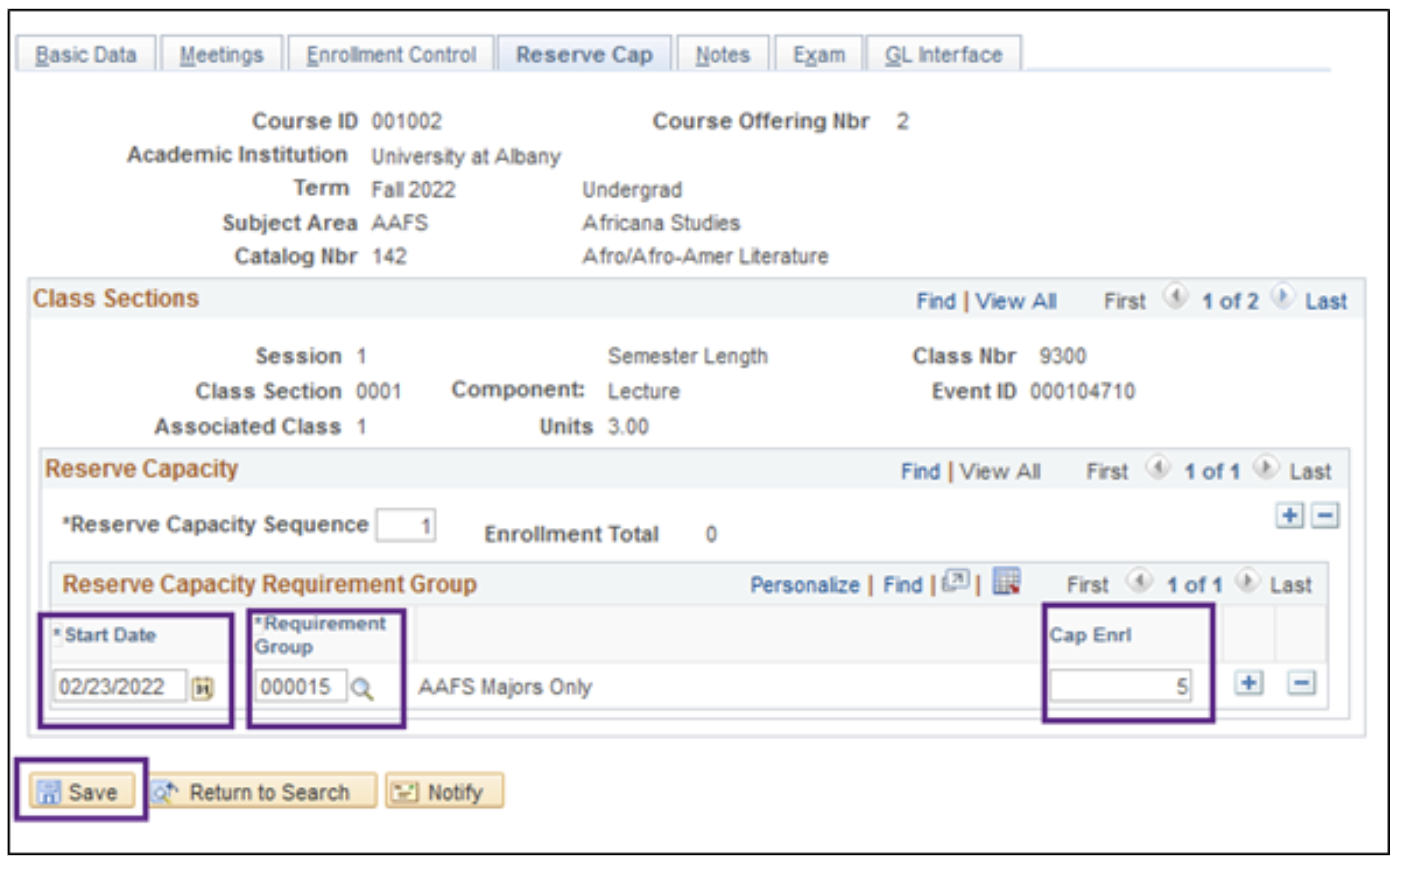 A screenshot of the PeopleSoft page, showing the actions described above in Step 4.